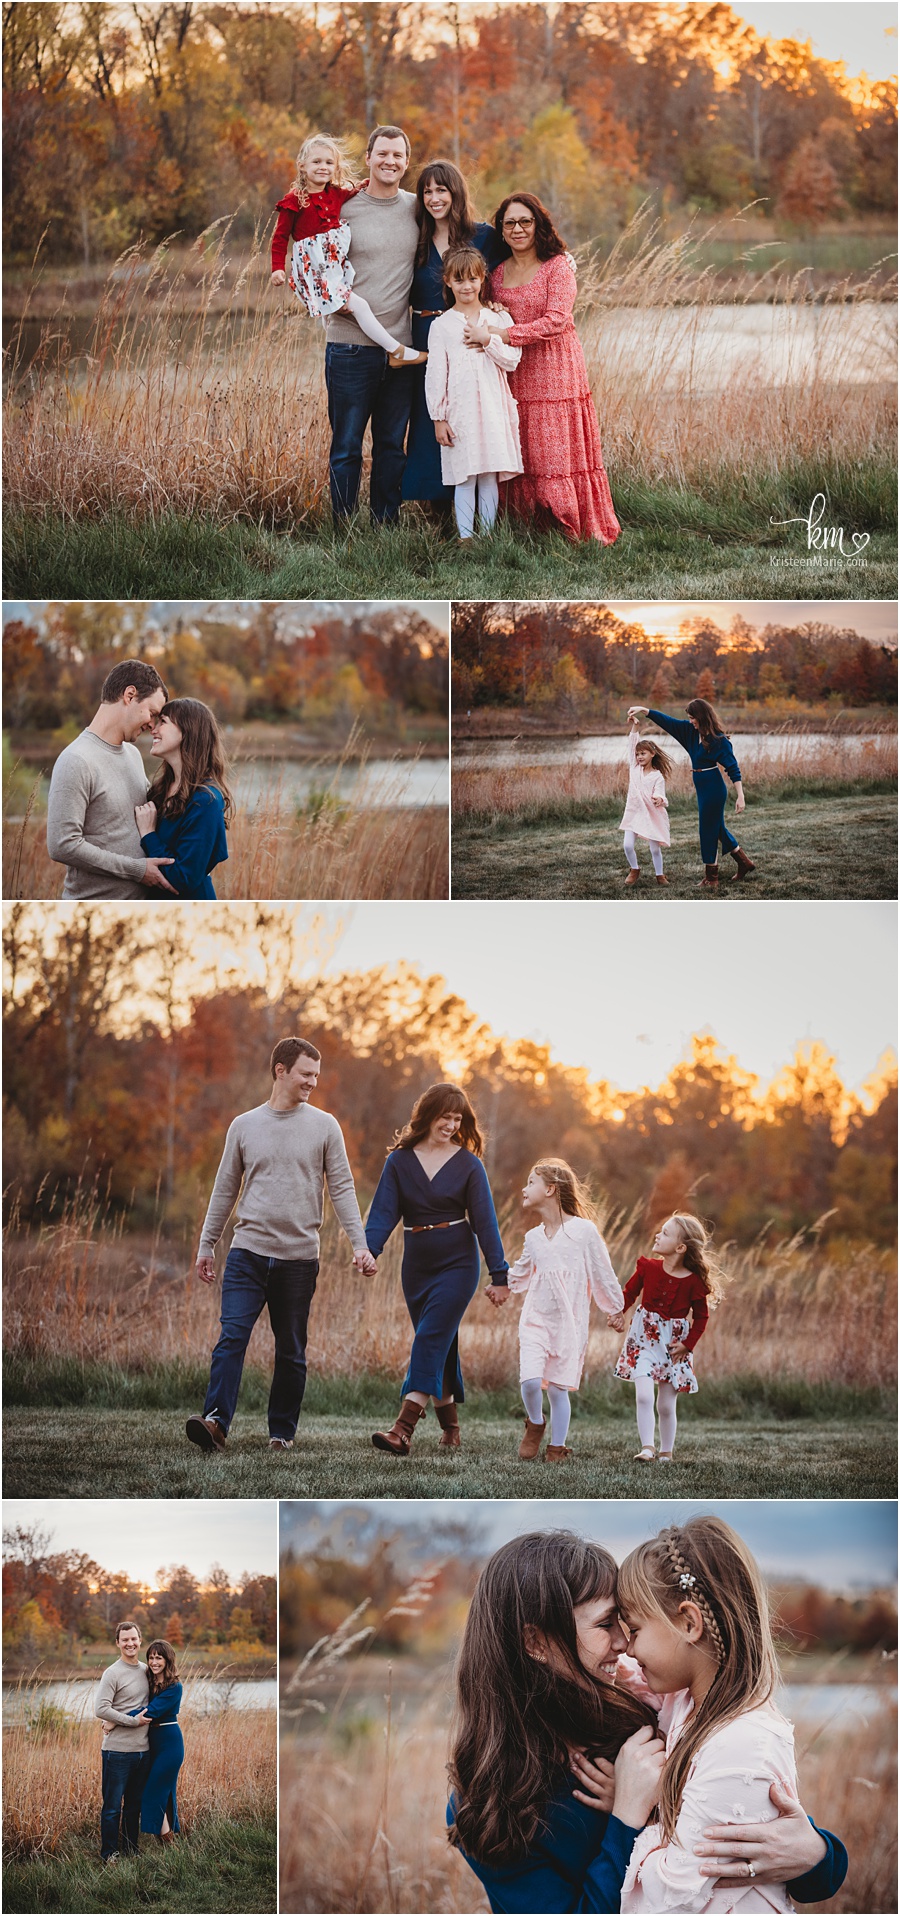 Indianapolis family photography - Fall pictures